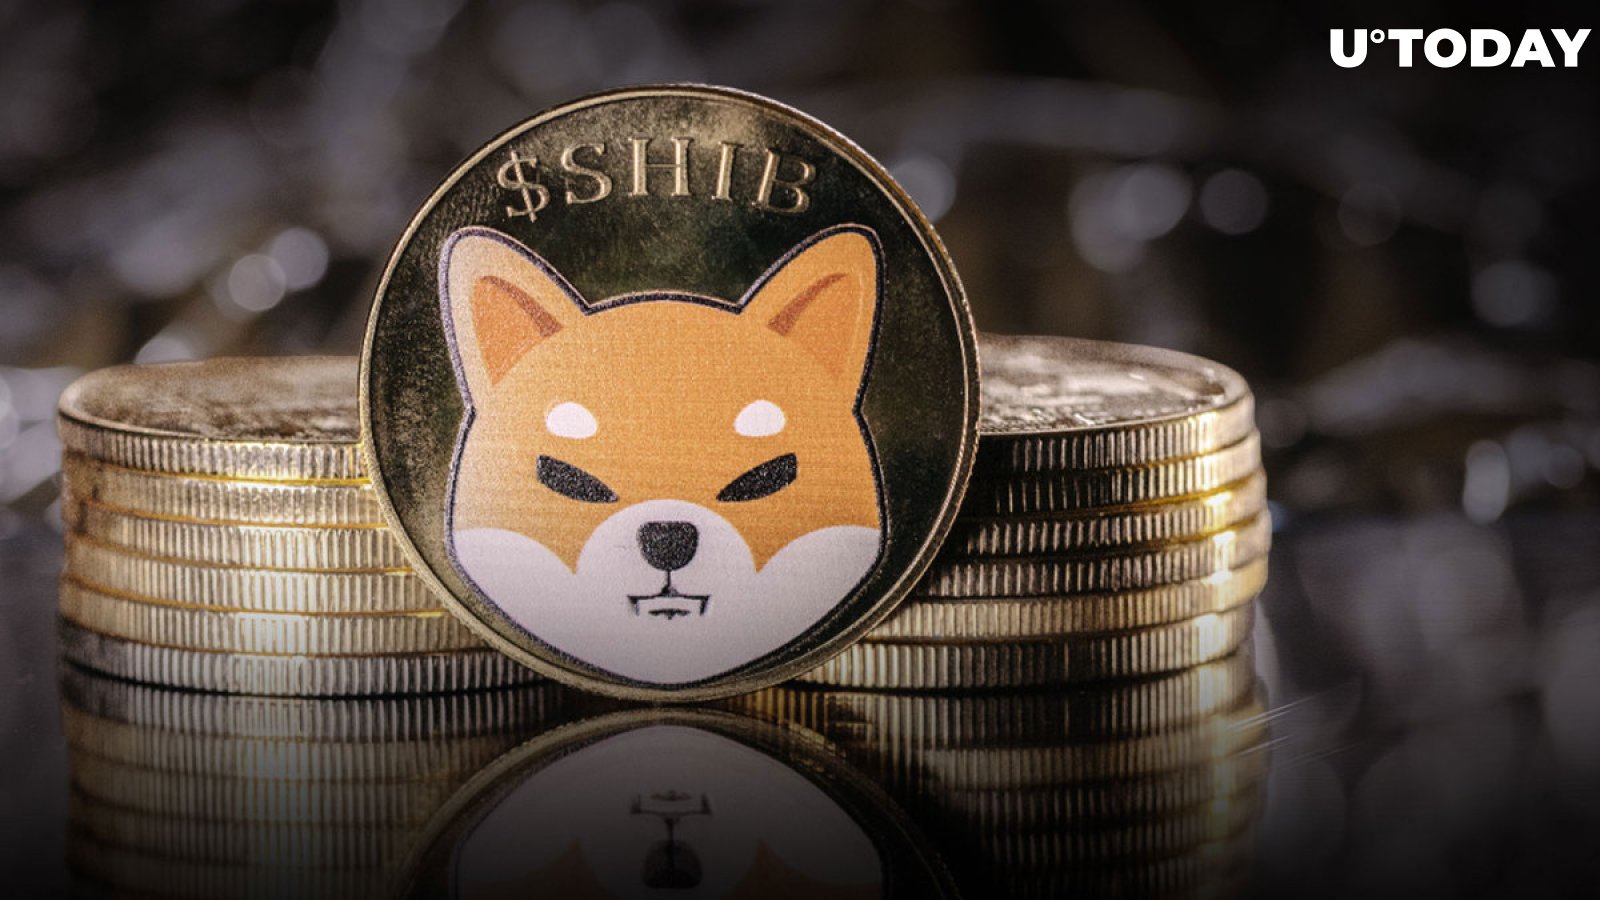 Shiba Inu (SHIB) Drops Zero in Its Price, Here's What It Needs to Tackle to Go Higher